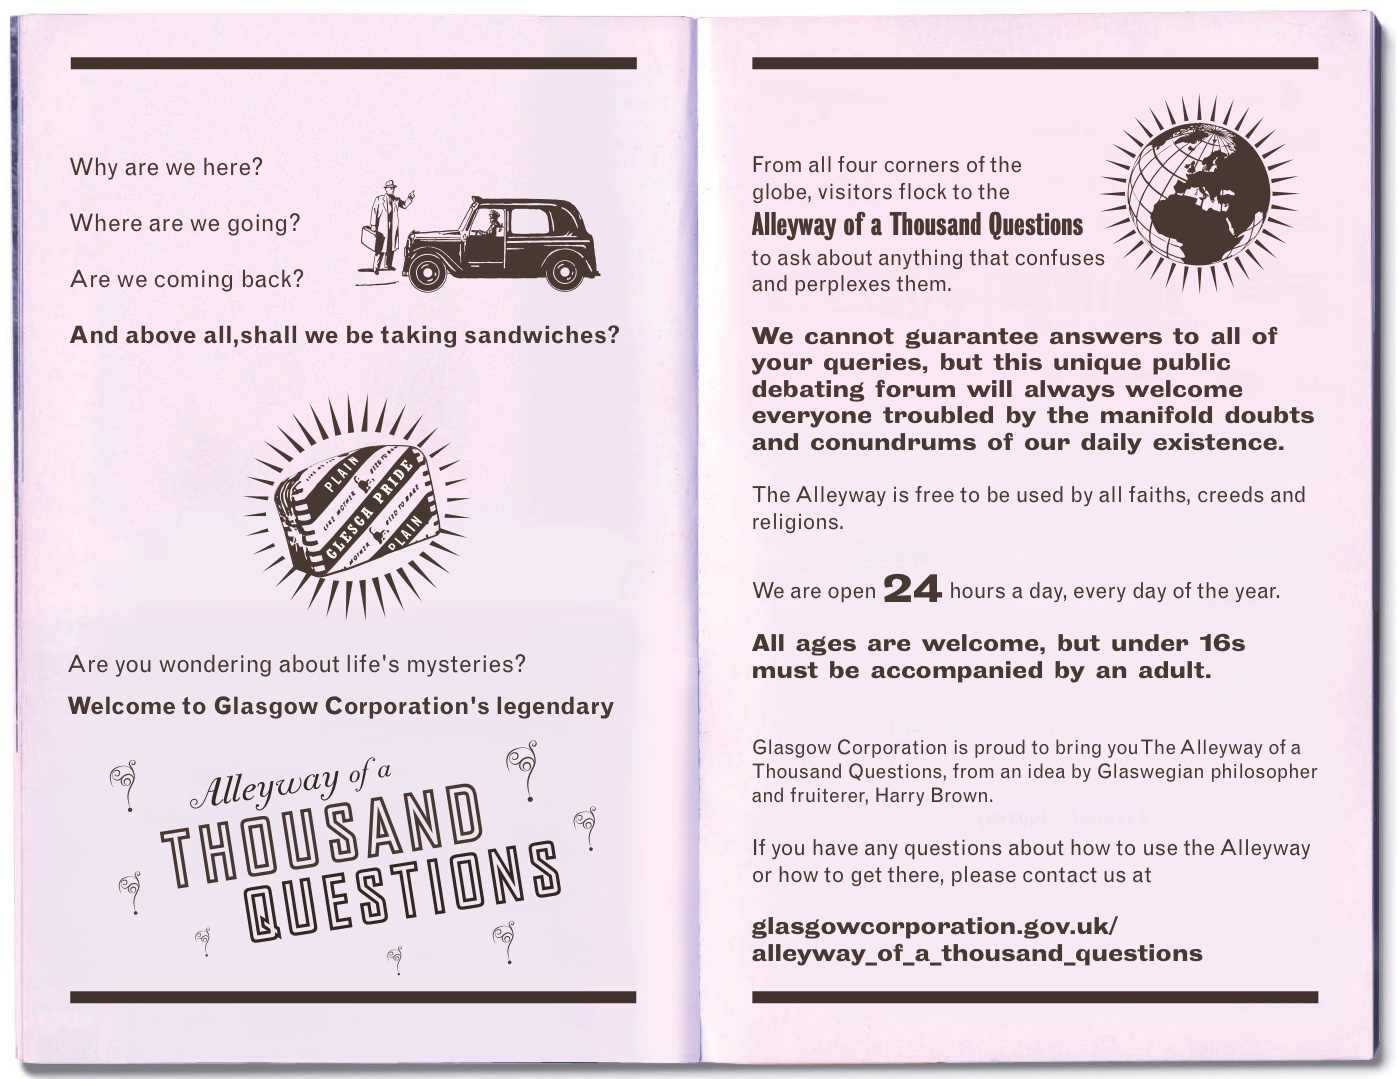 Alleyway of a Thousand Questions leaflet